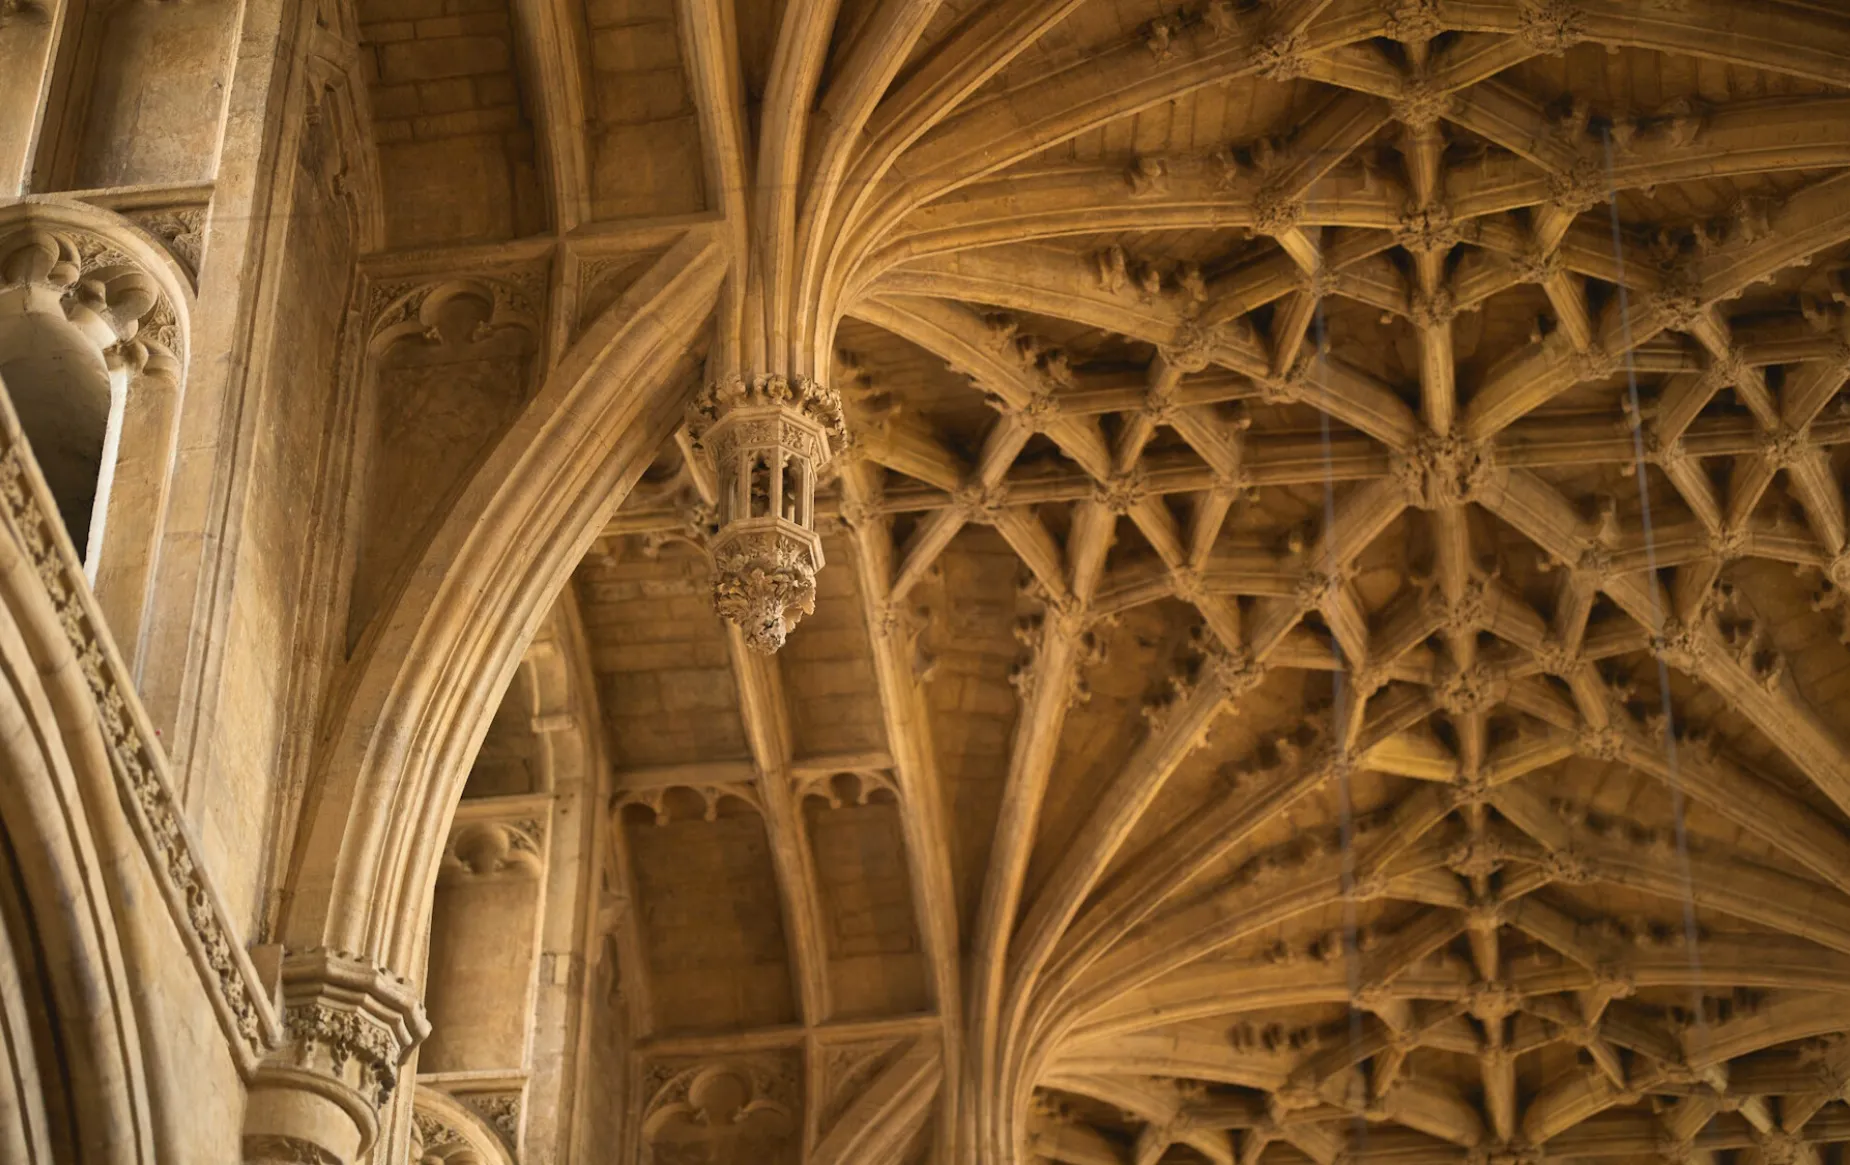 Cathedral vaulting